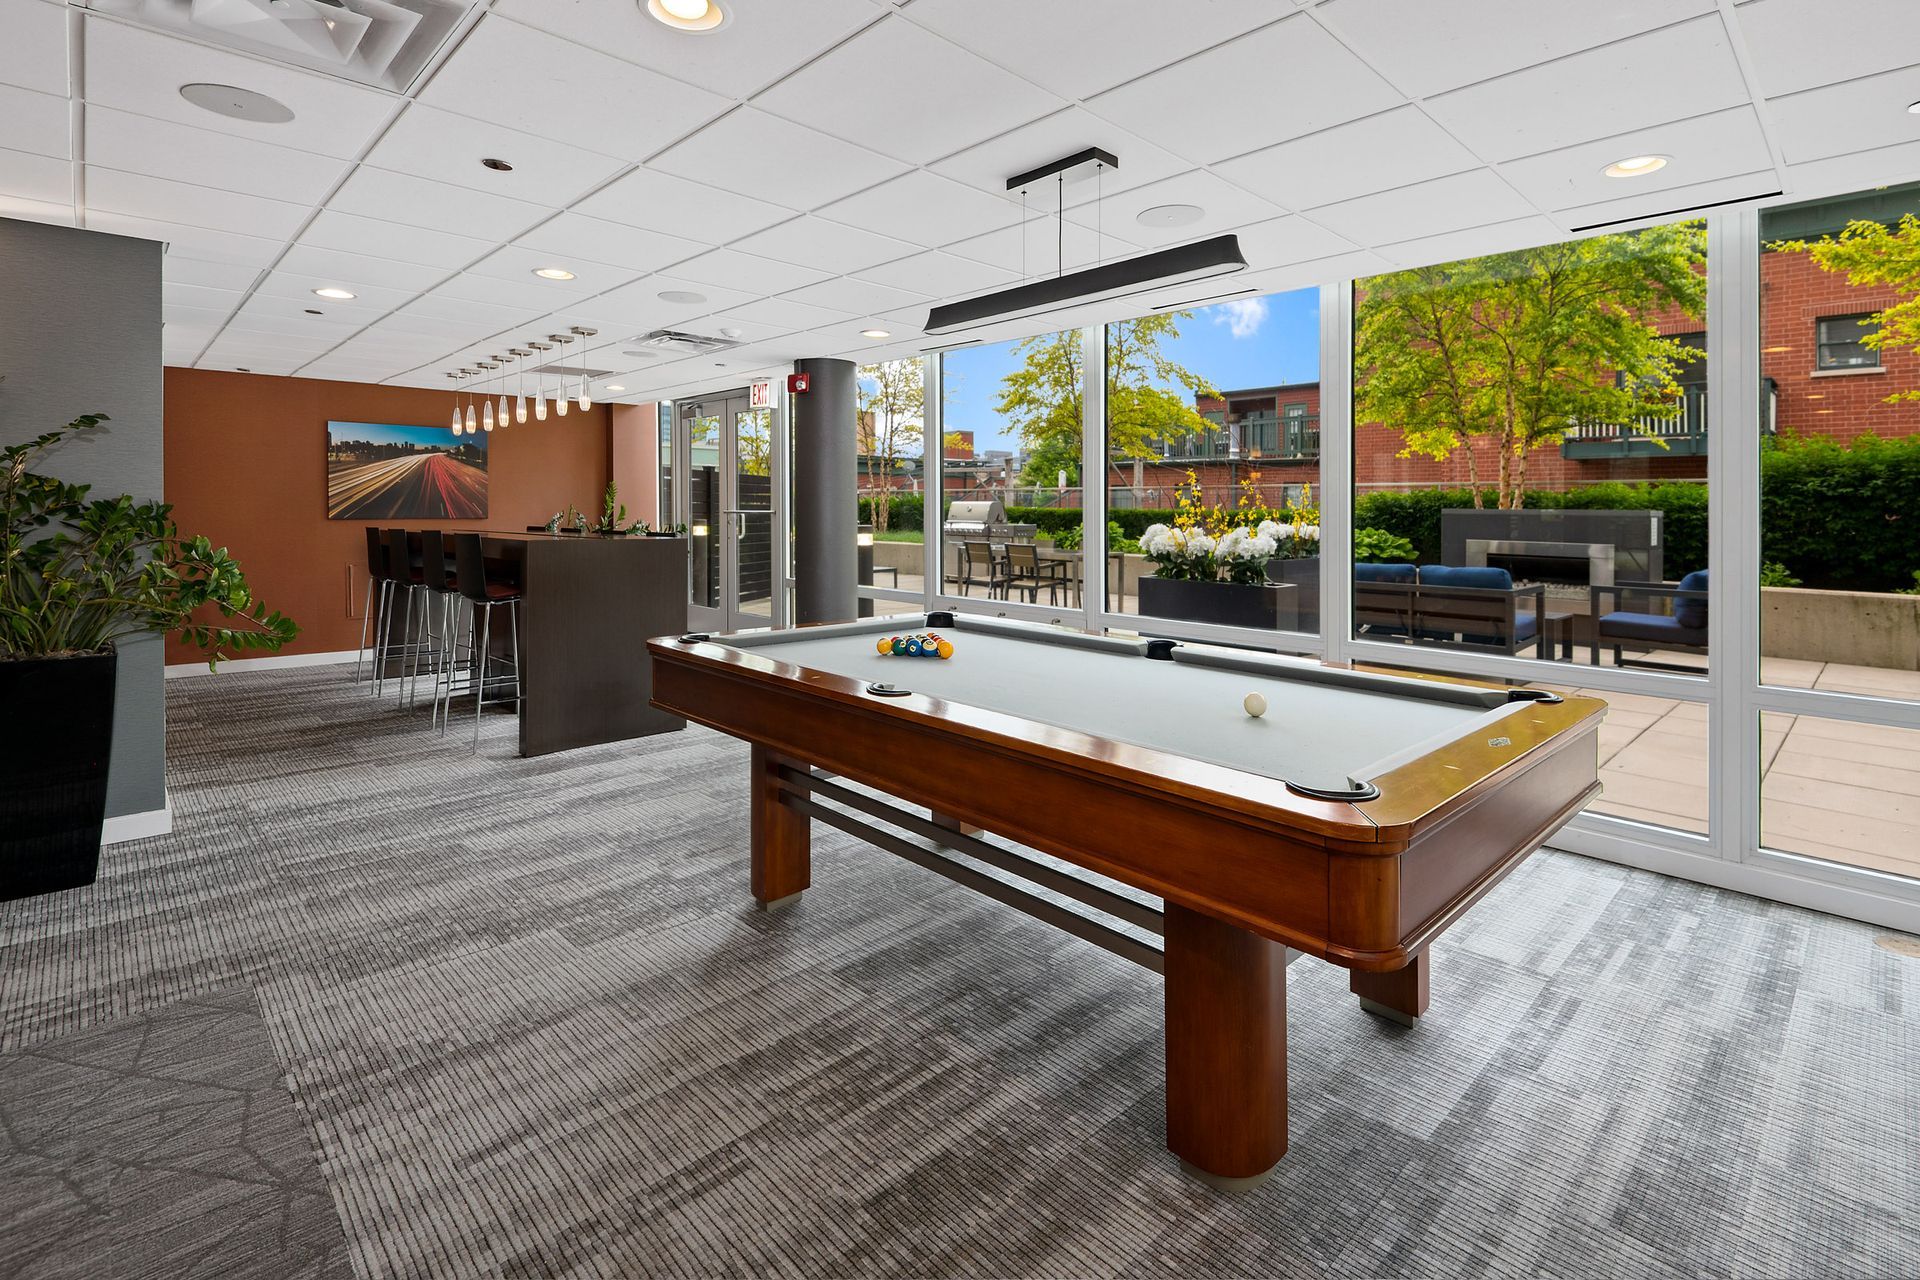 A pool table in a room with a lot of windows at 24 S Morgan Apartments.